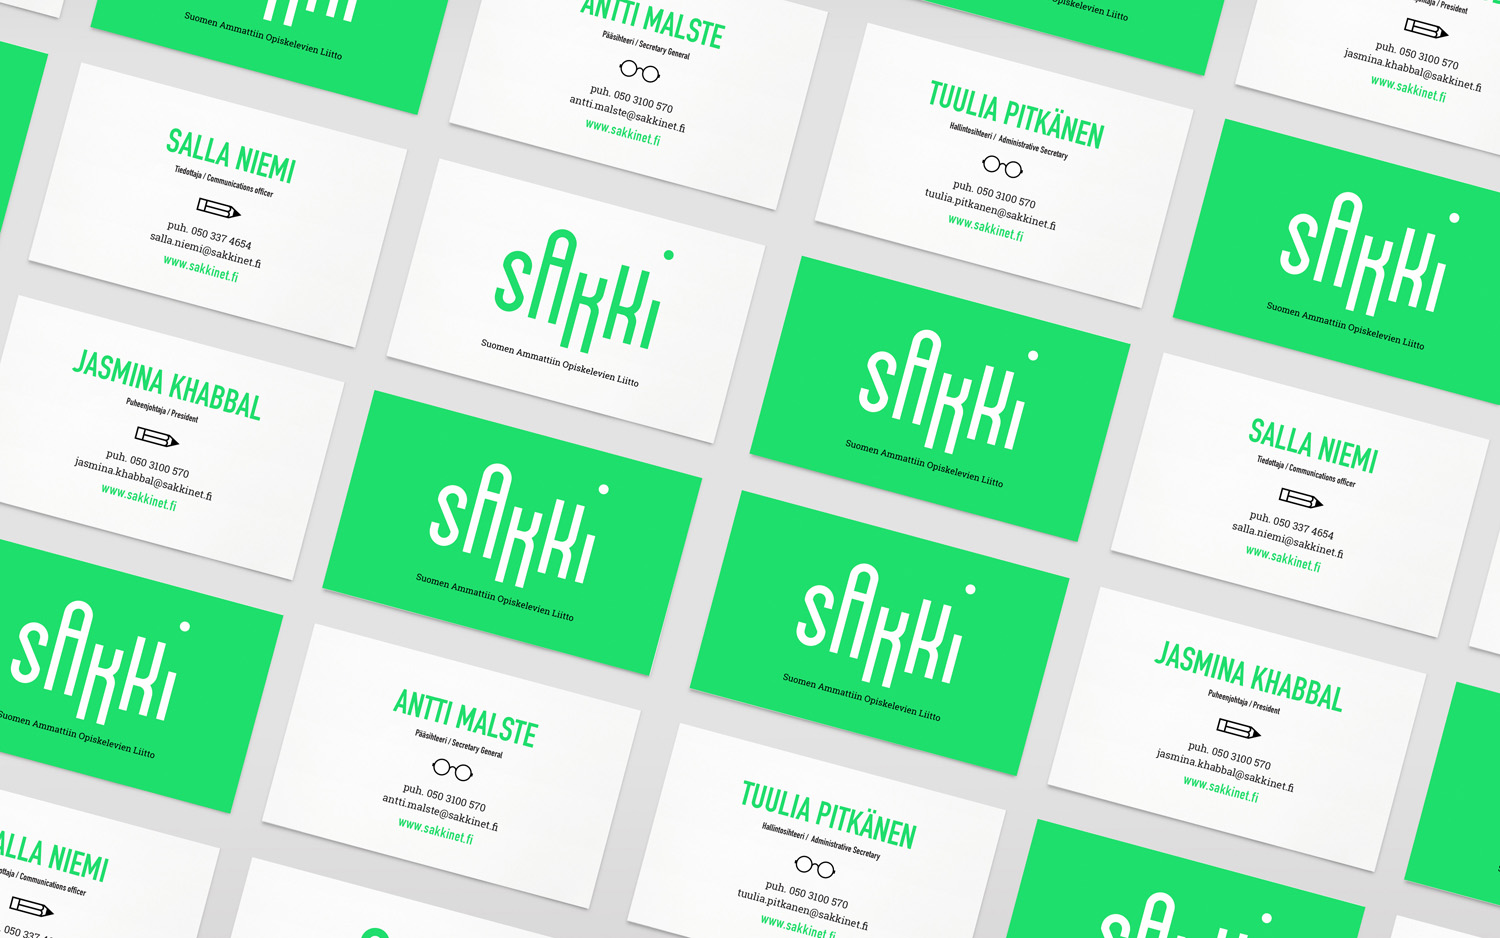 Logotype, business cards, icons and mobile-first experience by Bond for Sakki, Finland's national union of vocational students